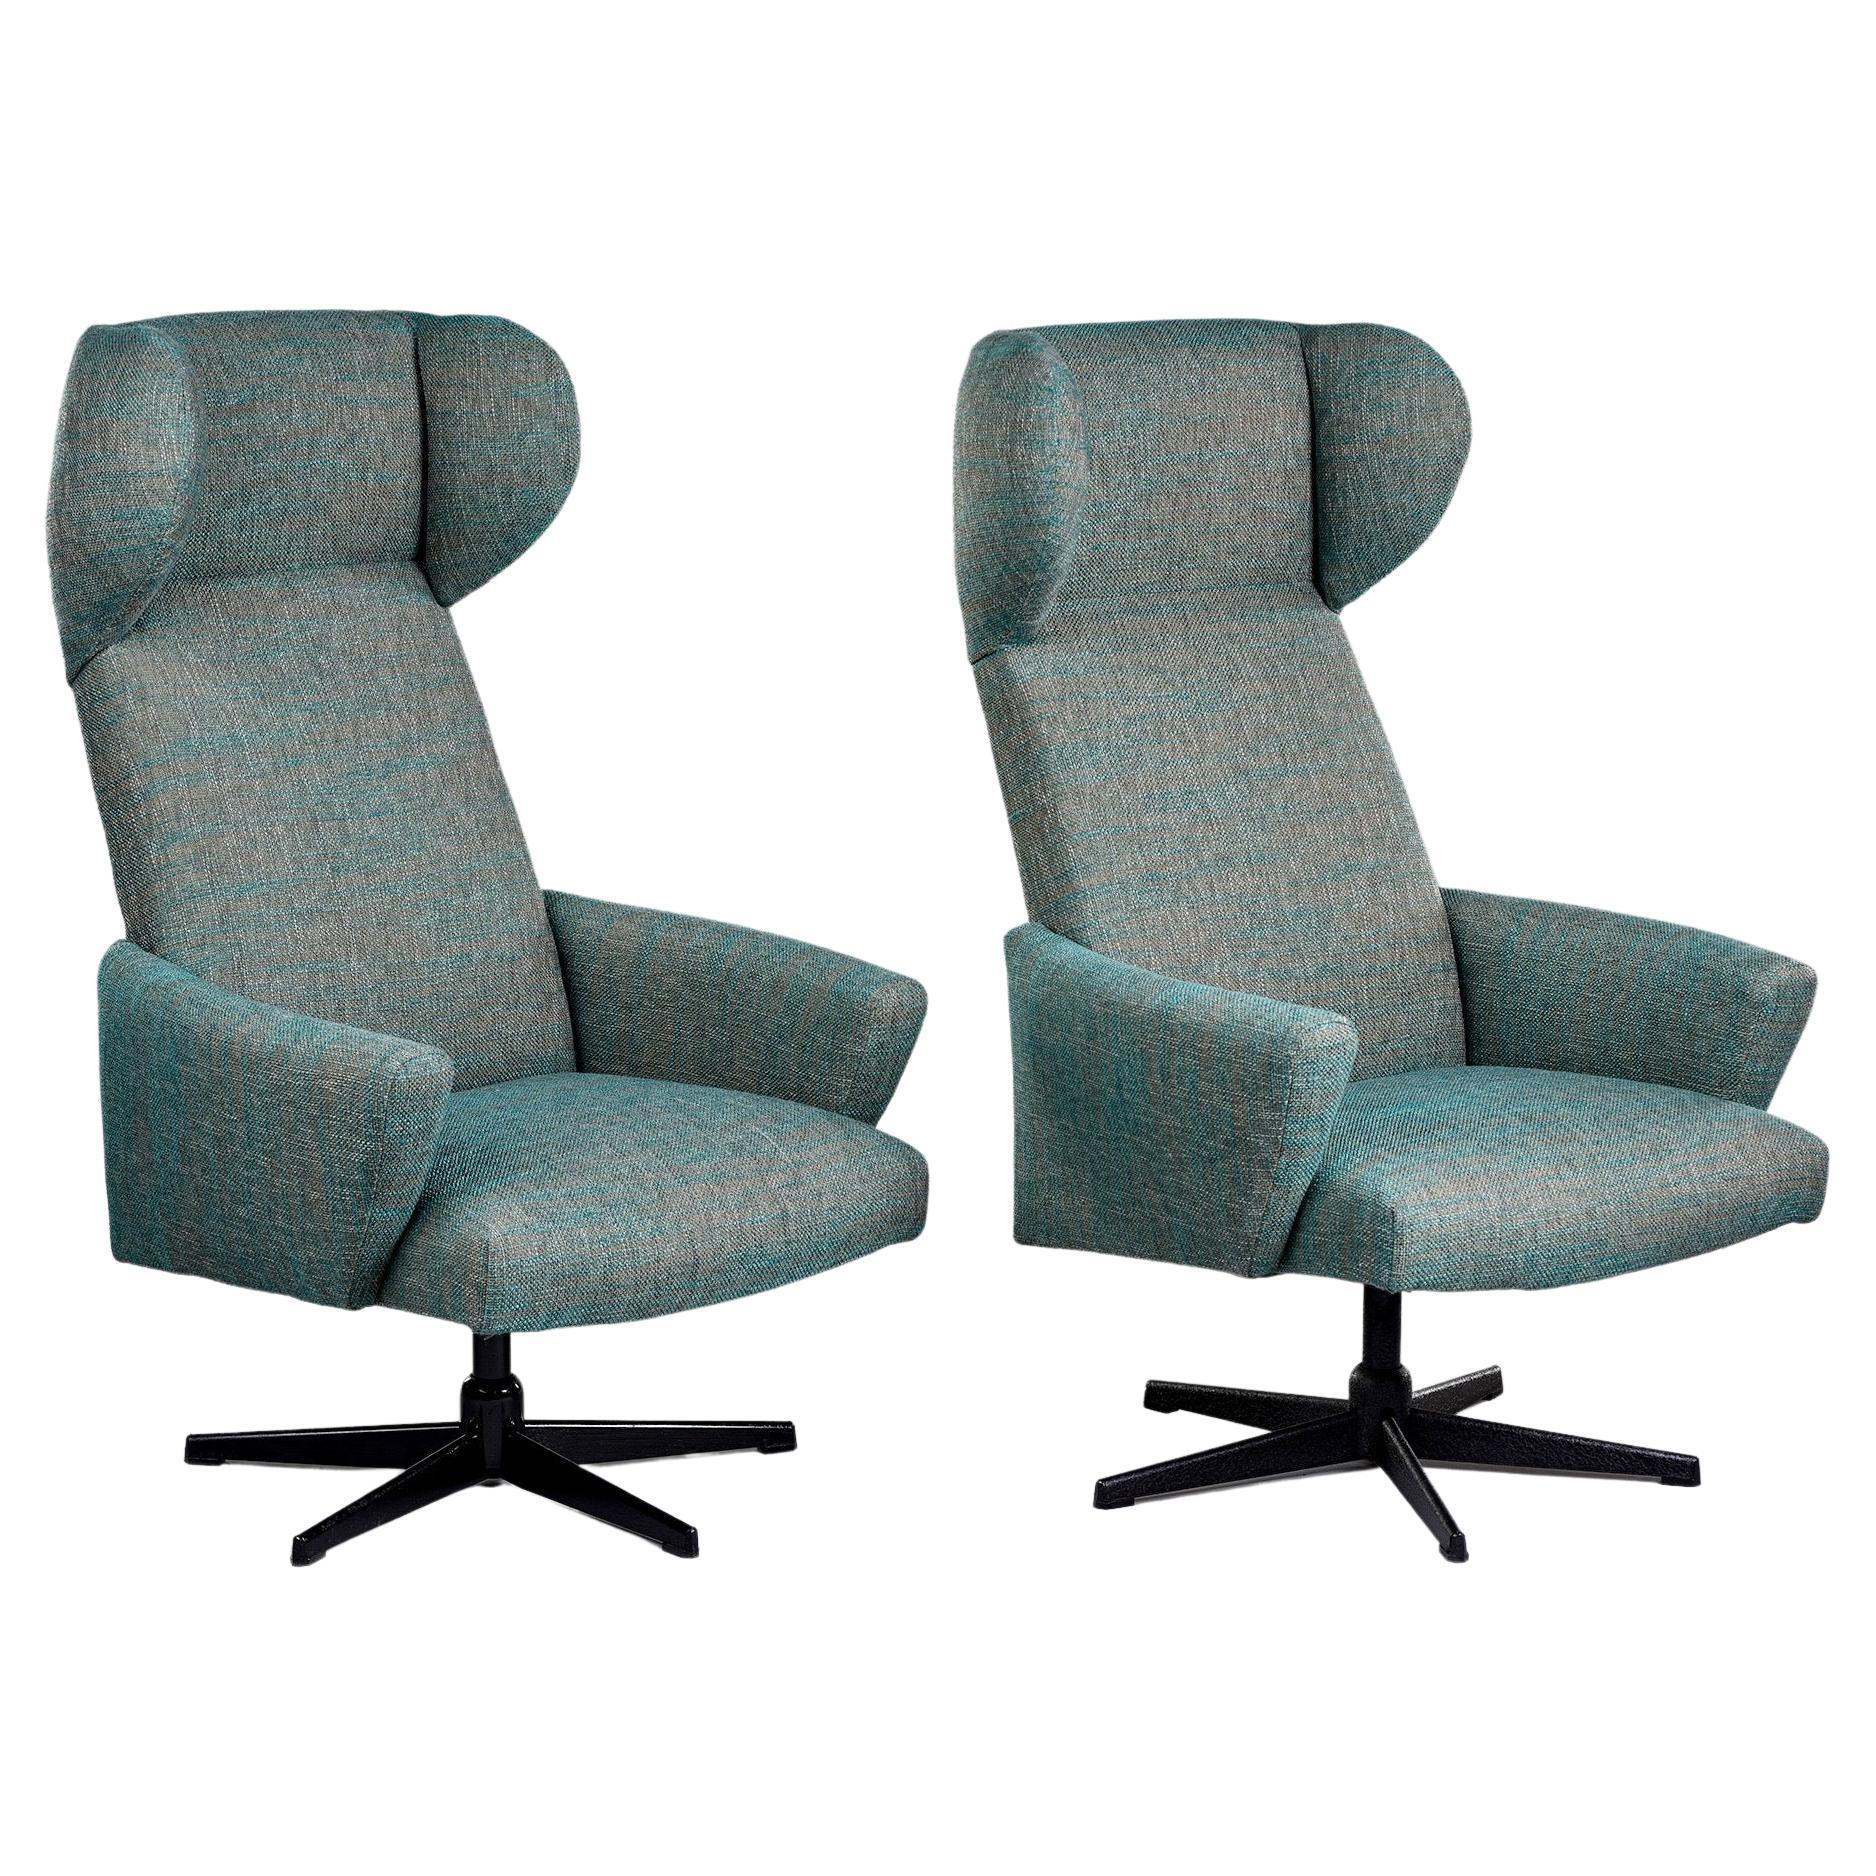 Pair Mid Century Tall Sculptural Wing Back Swivel Chairs with New Upholstery For Sale